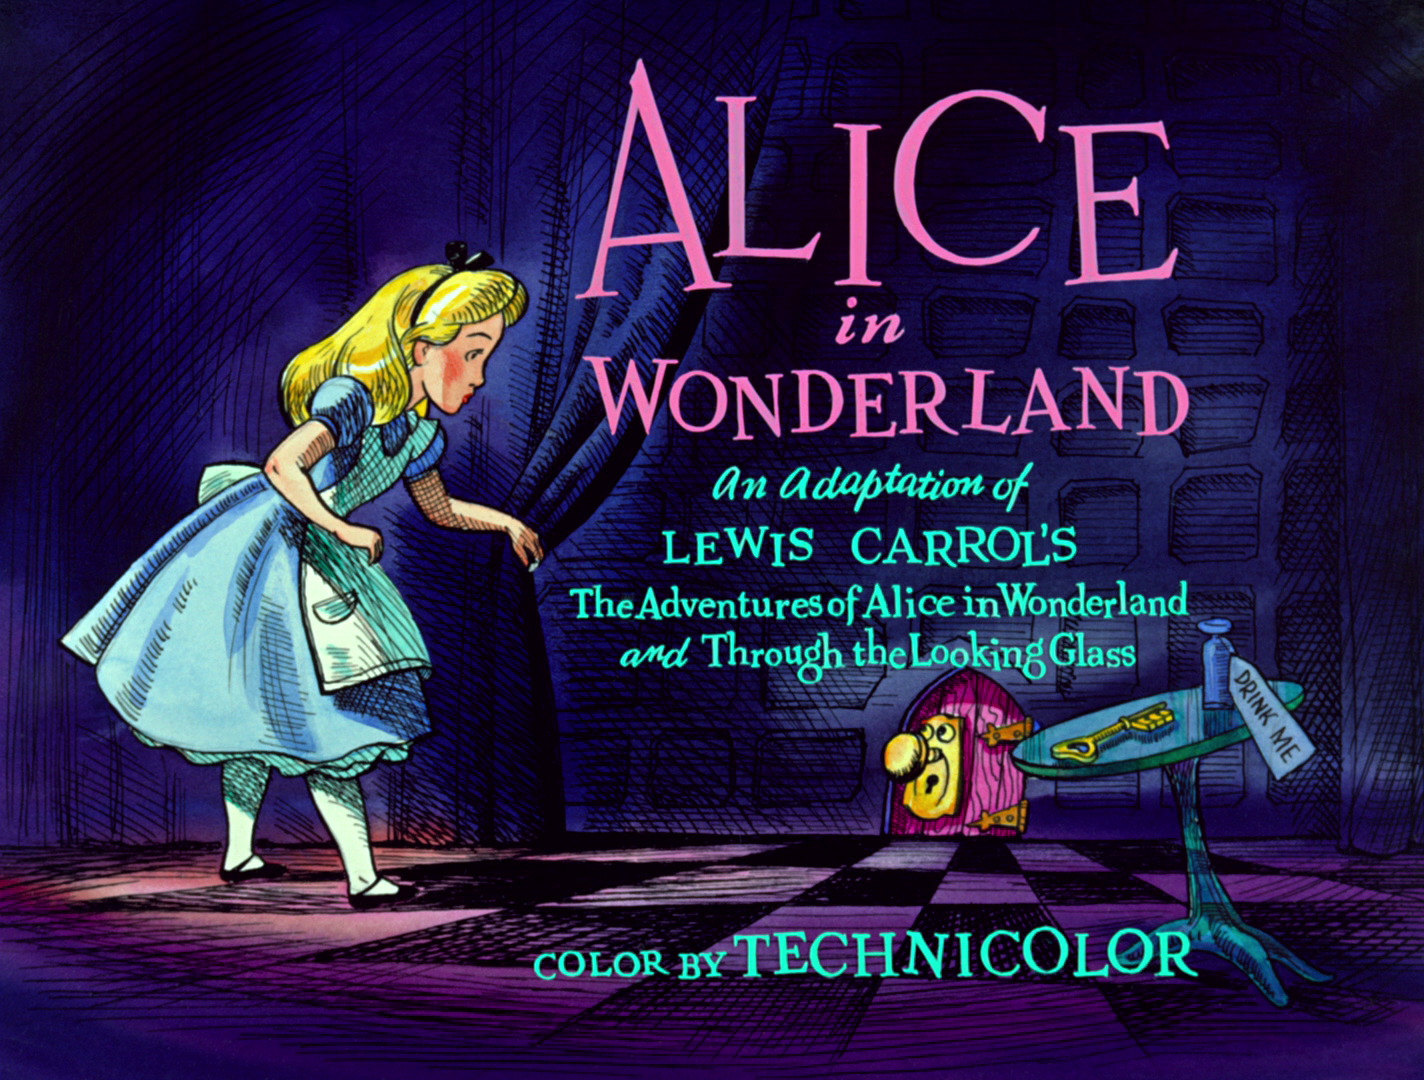 What song is about Alice in Wonderland?